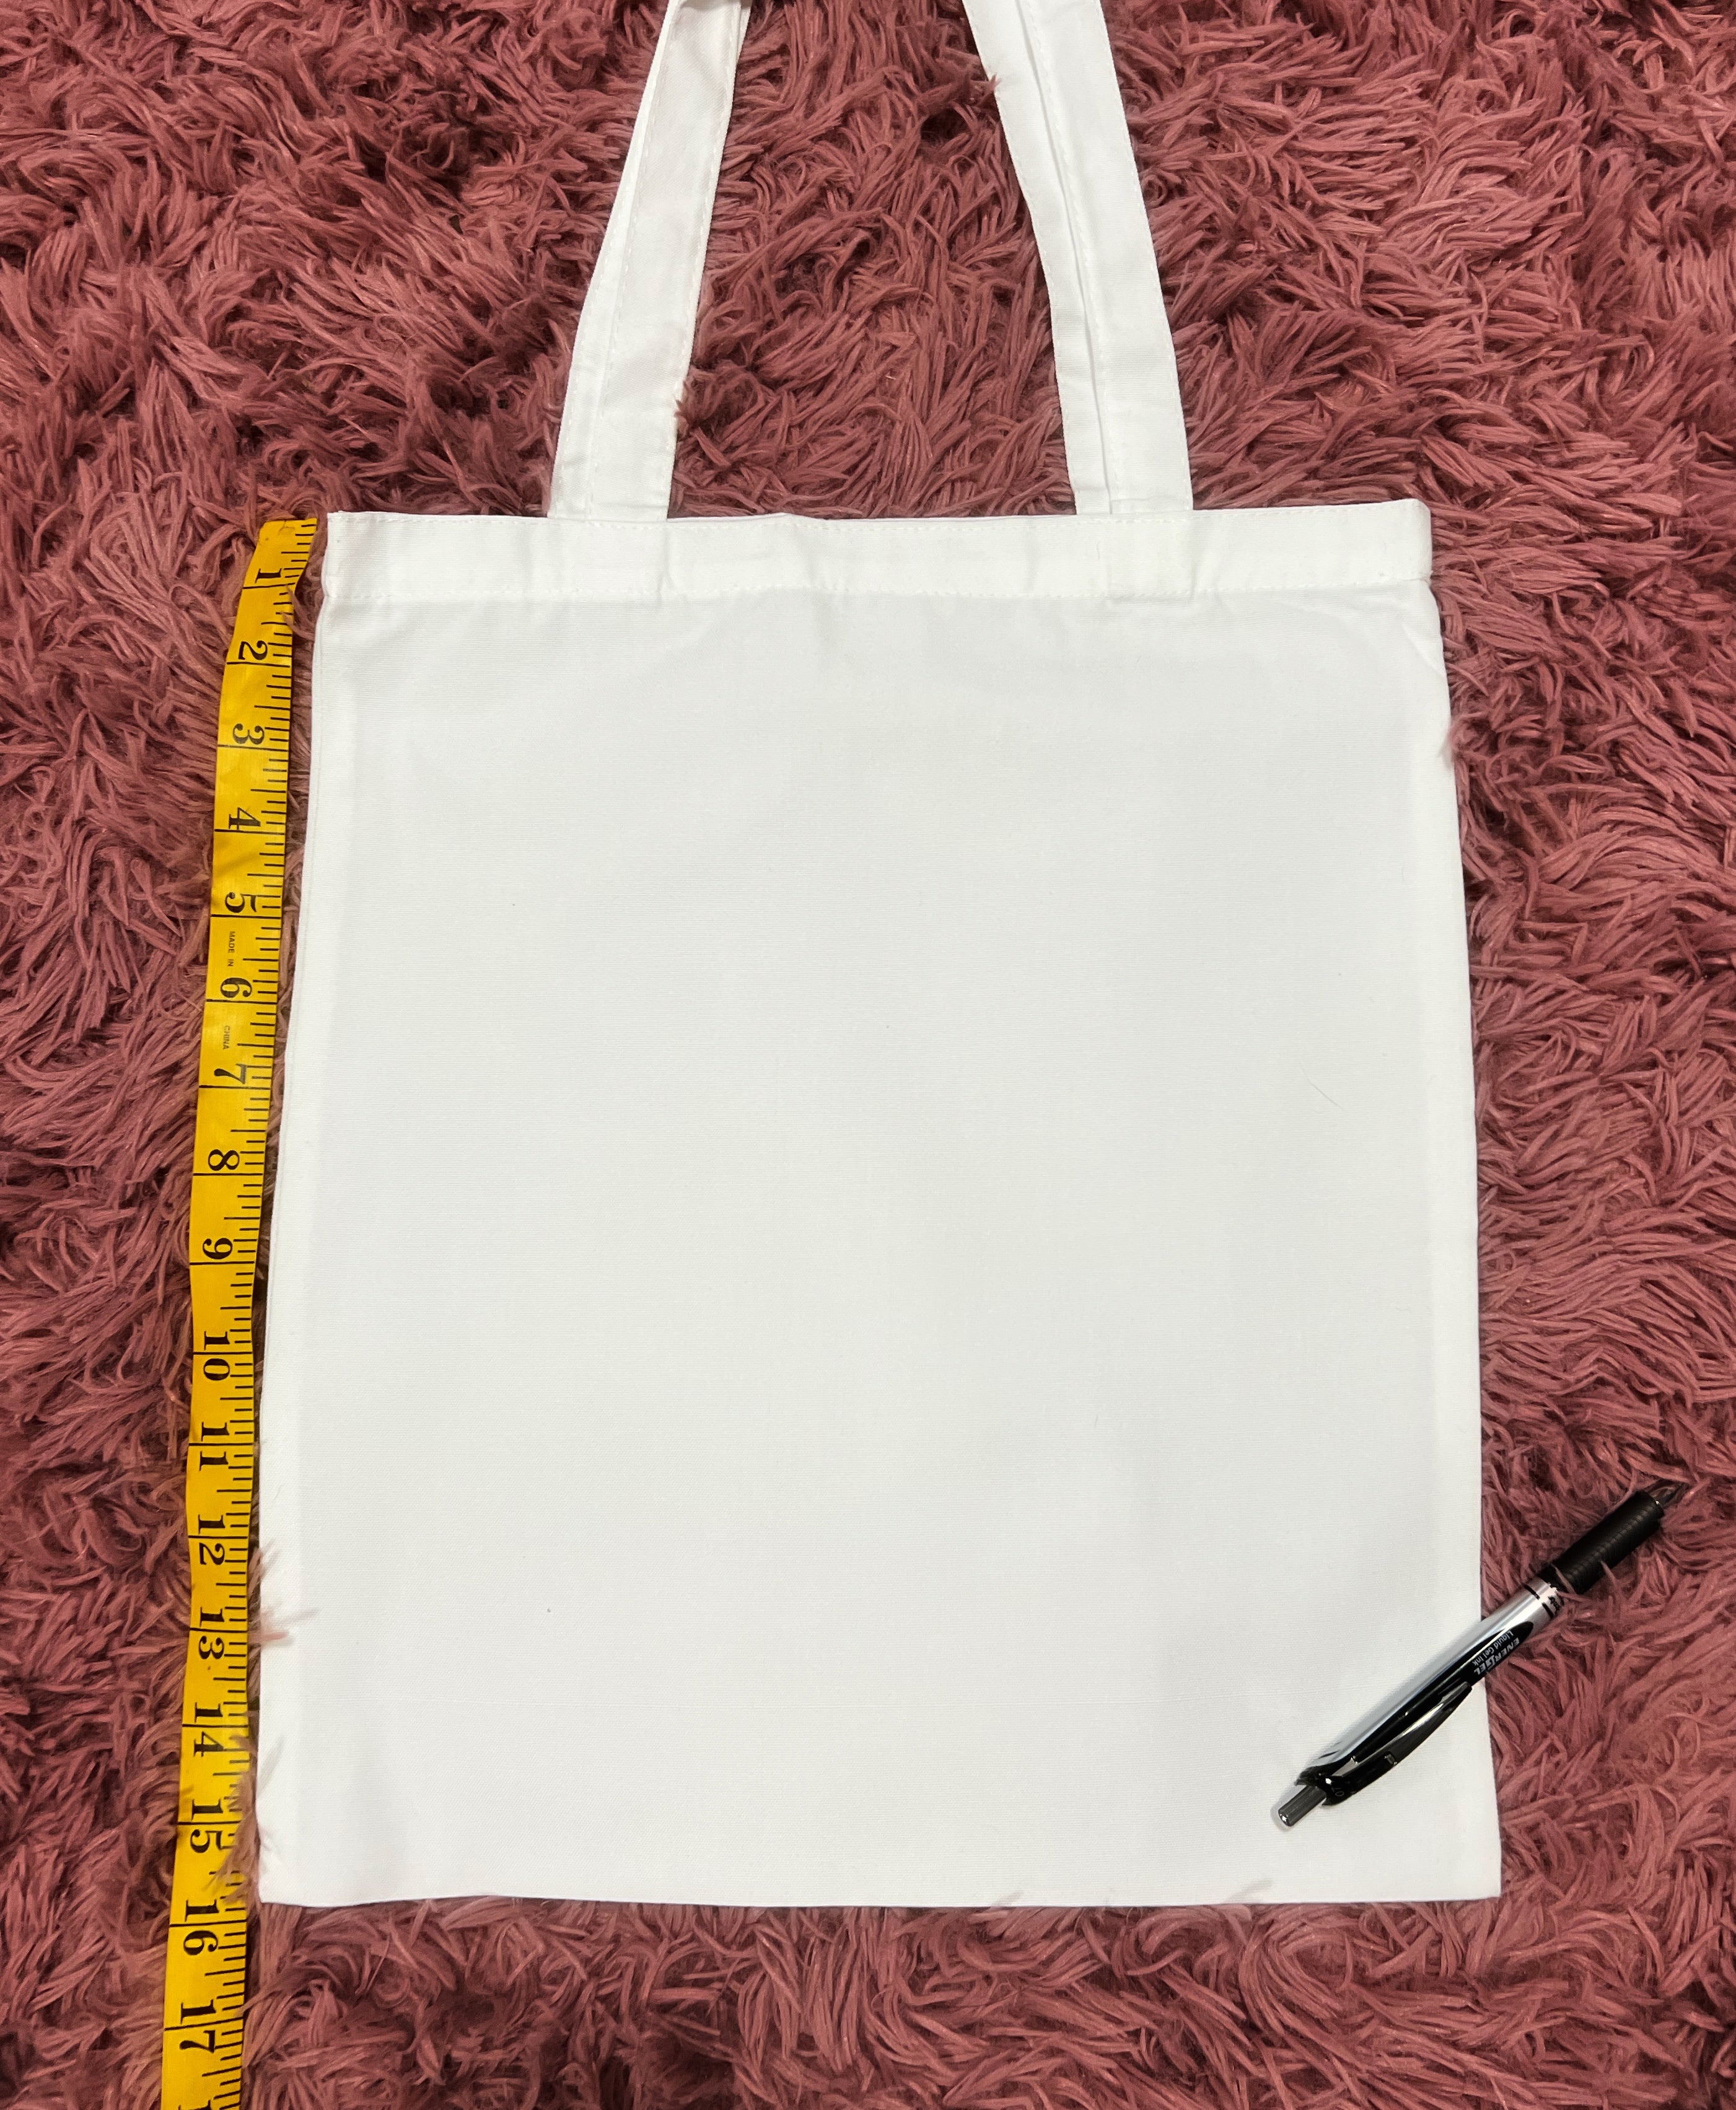 Buy Sublimation Tote Bags Sublimation Blank Polyester Tote Bags Sublimation  Canvas Bag Reusable Grocery Bags for DIY Crafting(40 Pieces) at Amazon.in